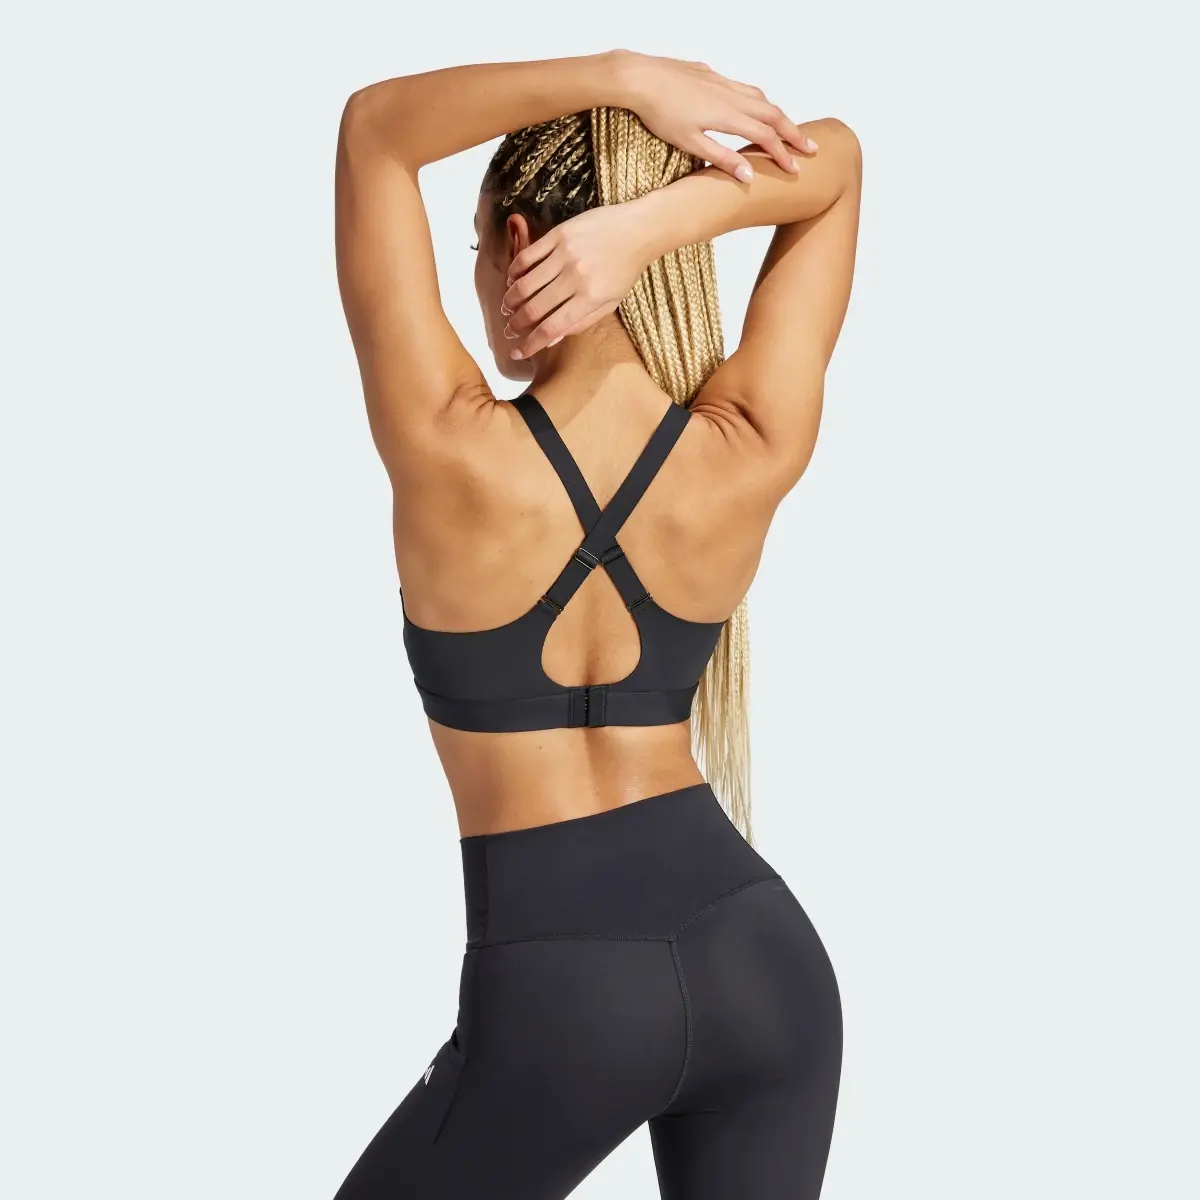 Adidas Brassière de training TLRD Impact Luxe Maintien fort. 3